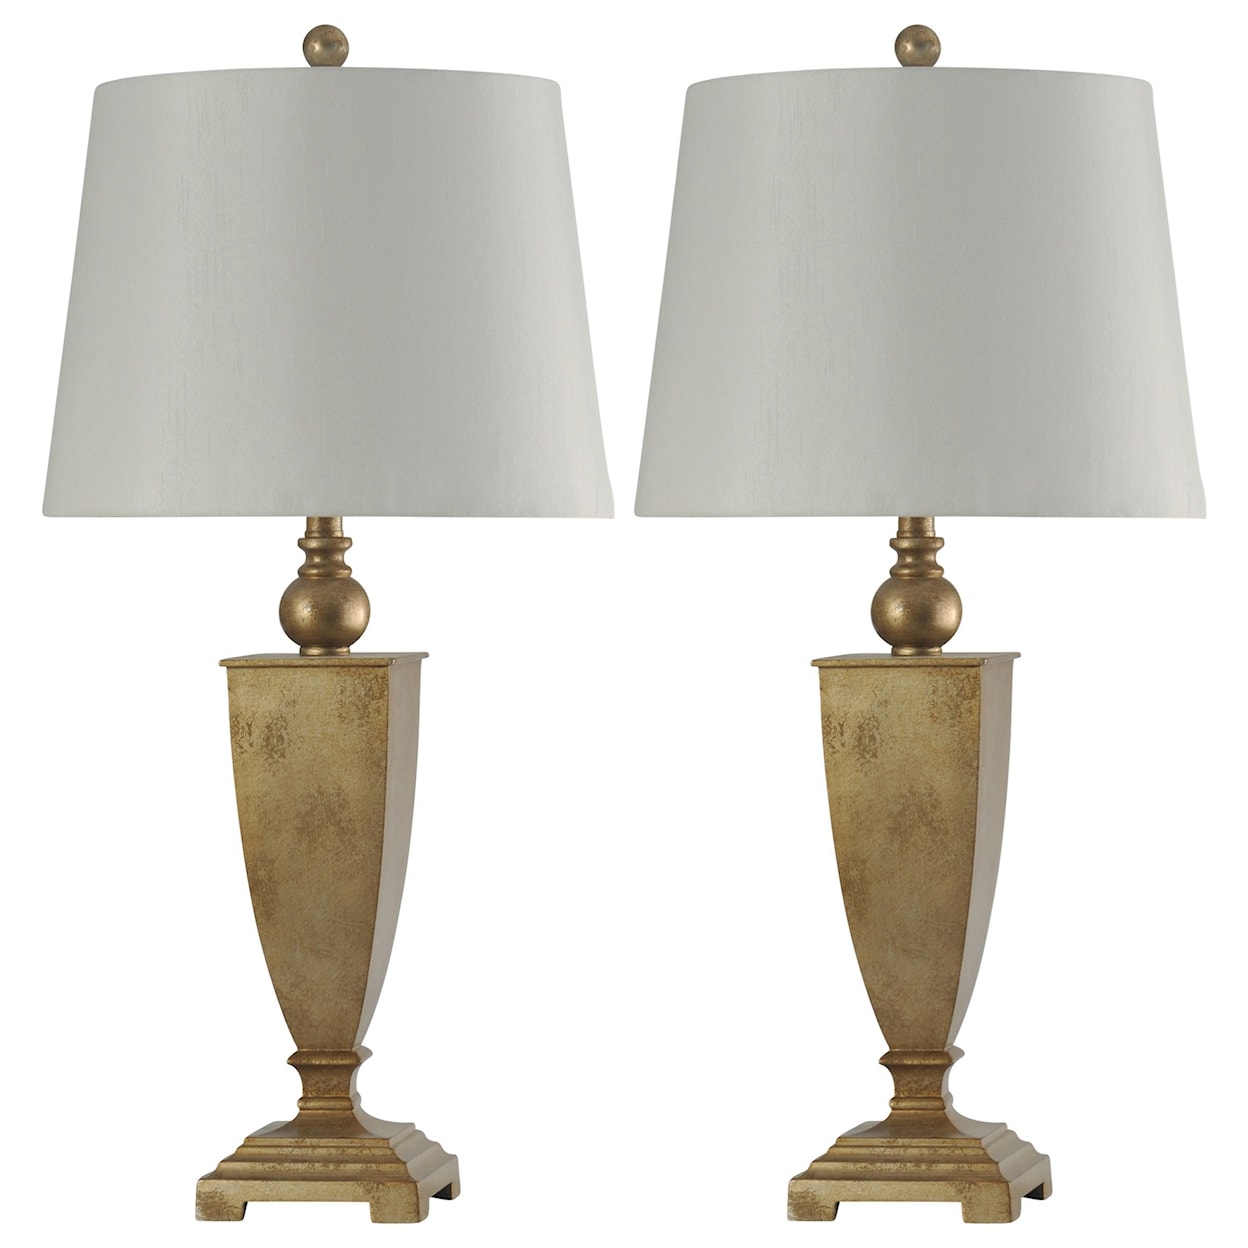 StyleCraft Lamps Pair of Traditional Table Lamps